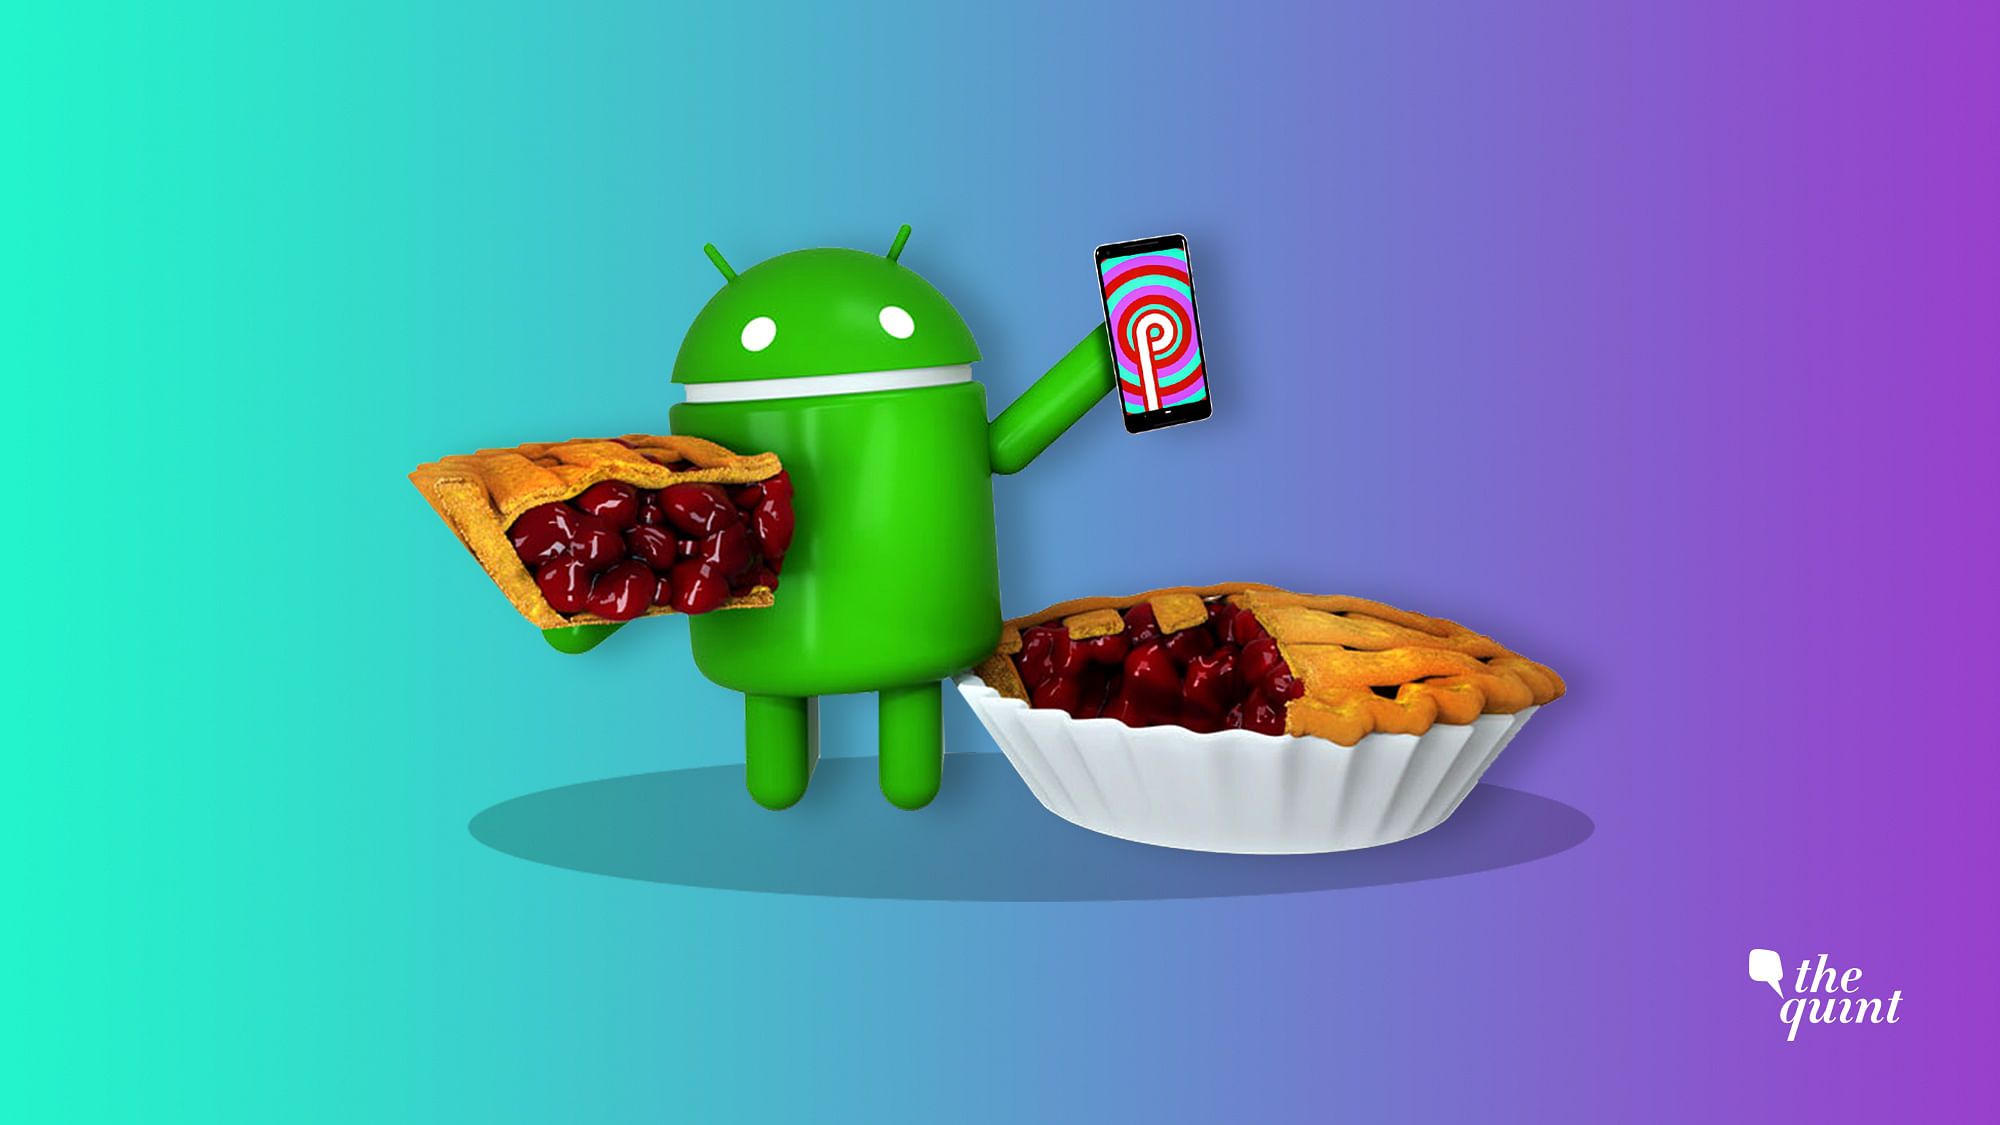 After months of speculation, Android P has been finally named Pie.